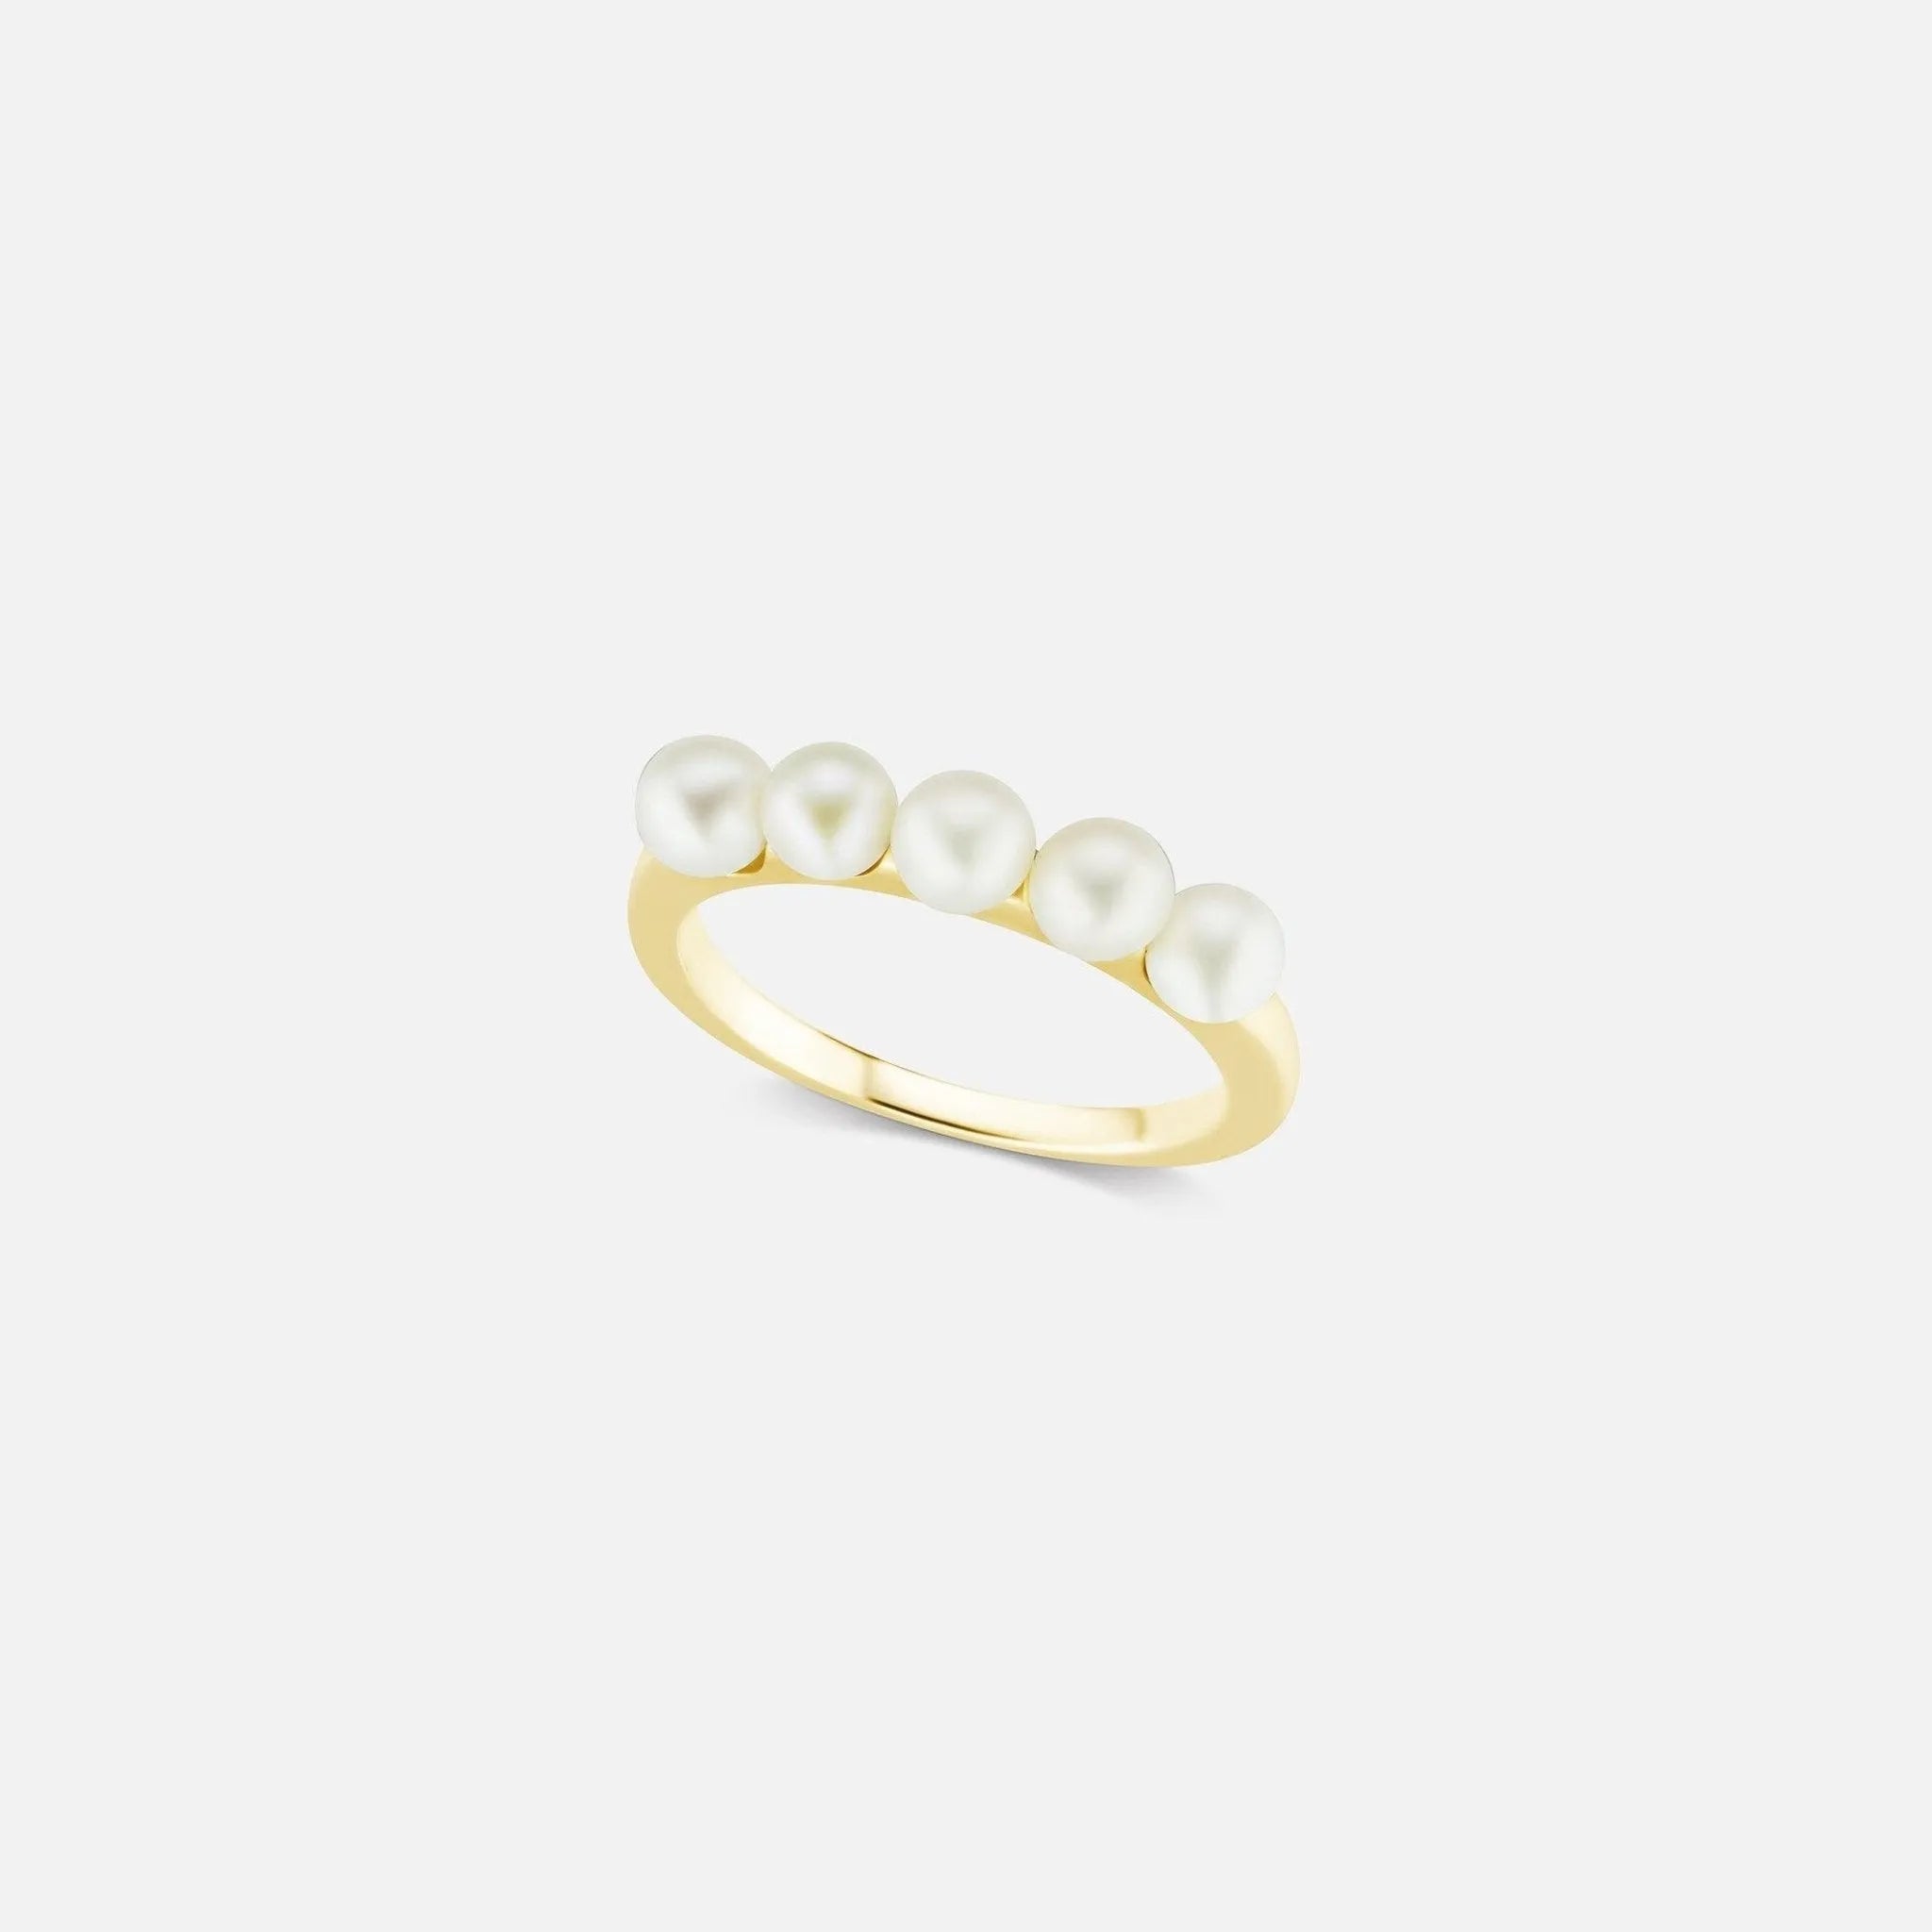 The Gold Multi Pearl Ring - At Present